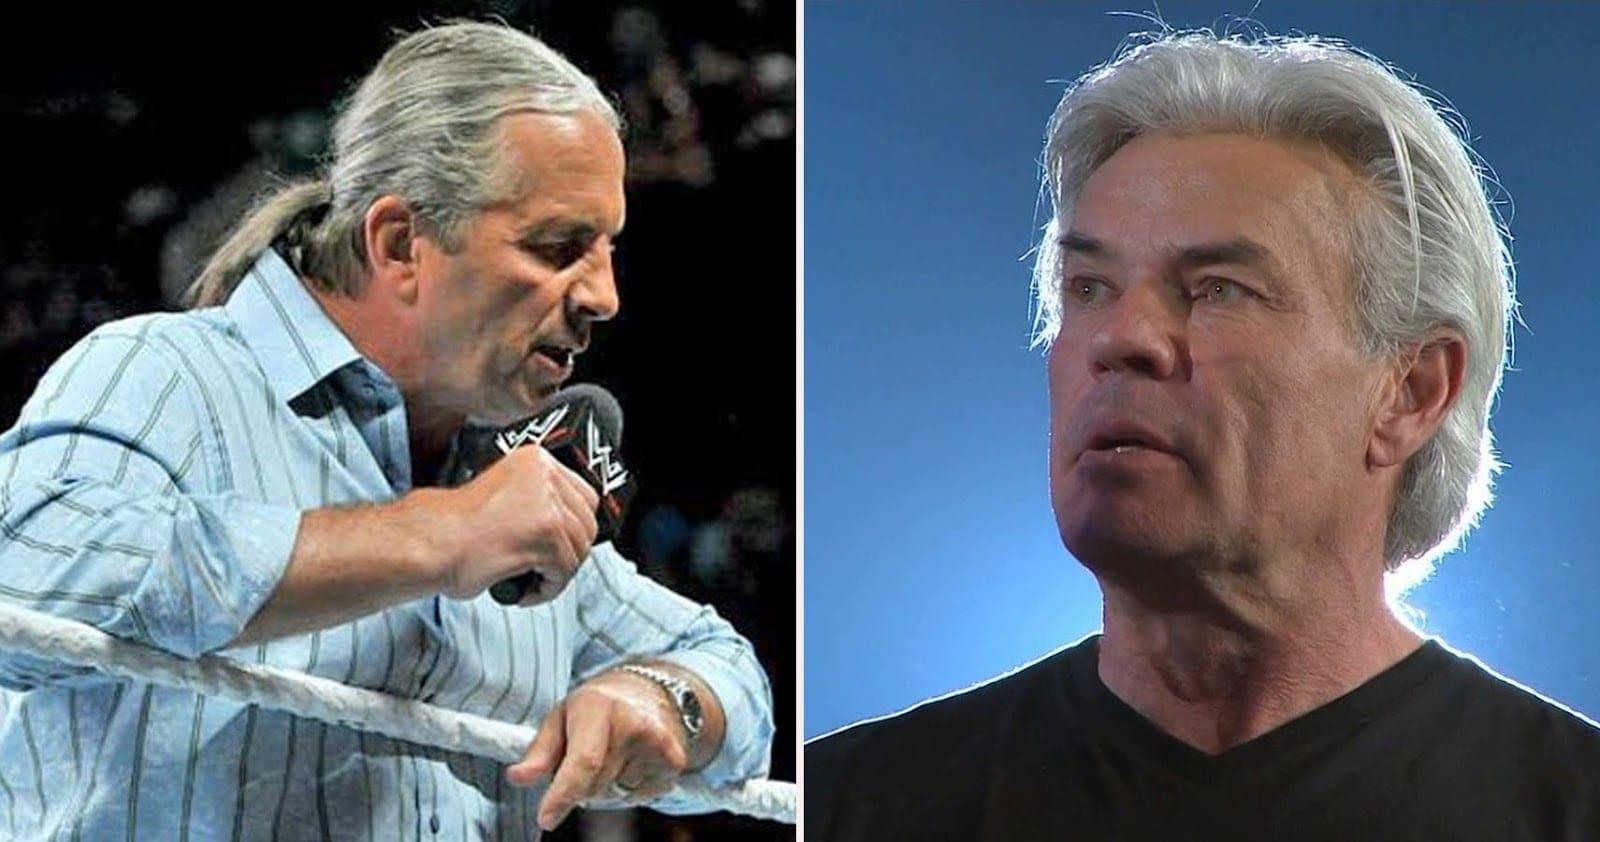 Bret Hart Says Eric Bischoff Is ‘The Stupidest Guy I Ever Met!’